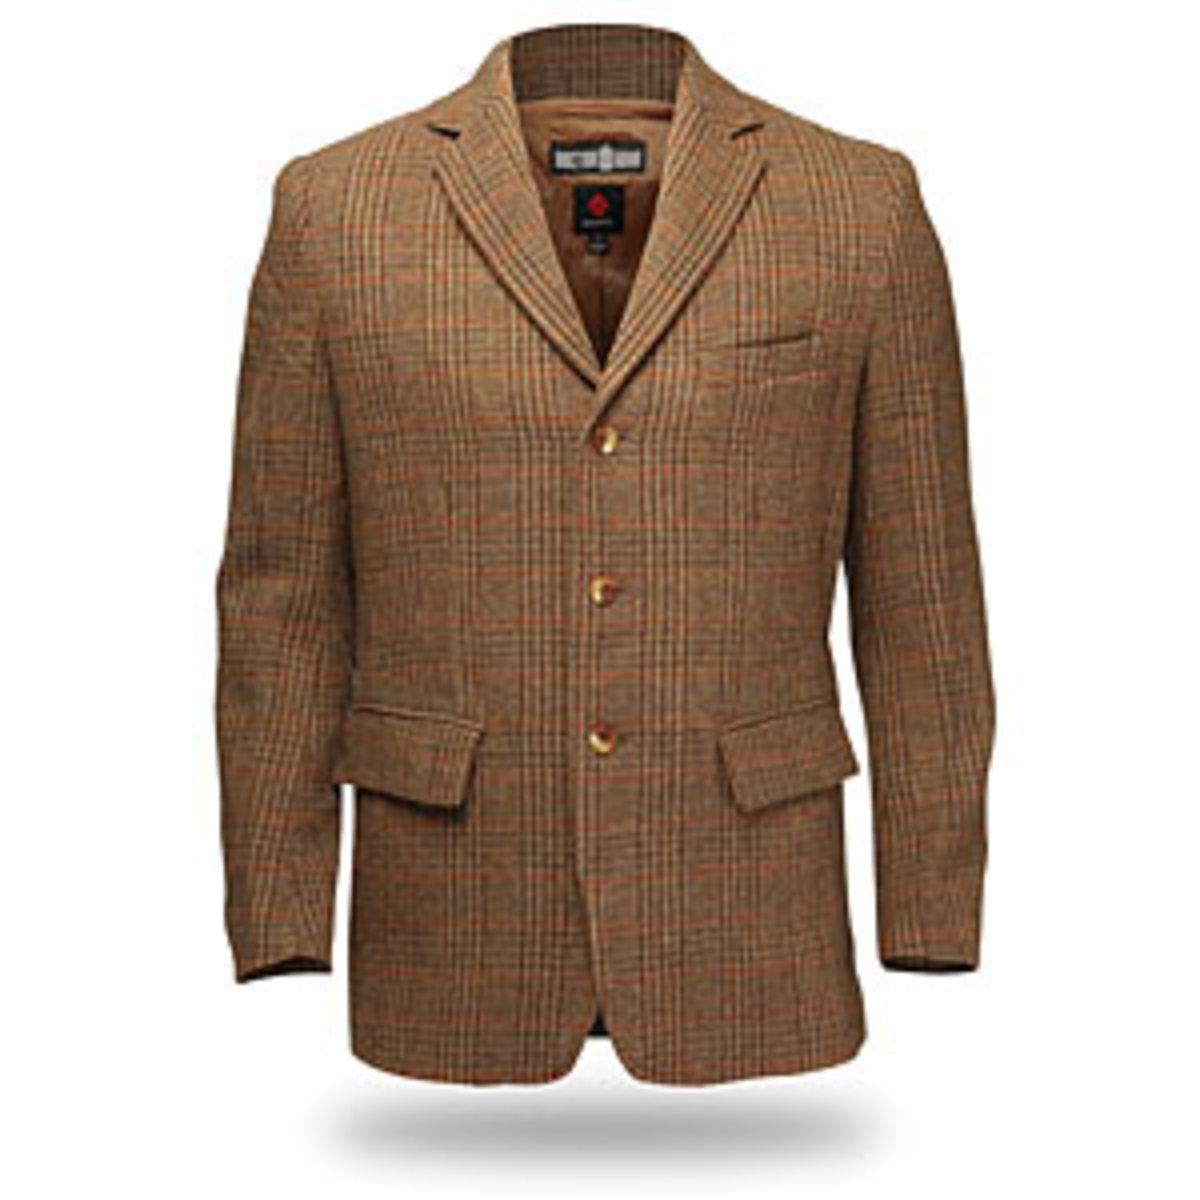 Doctor Who Costume: The Eleventh Dr. Jacket and Accessories - HubPages